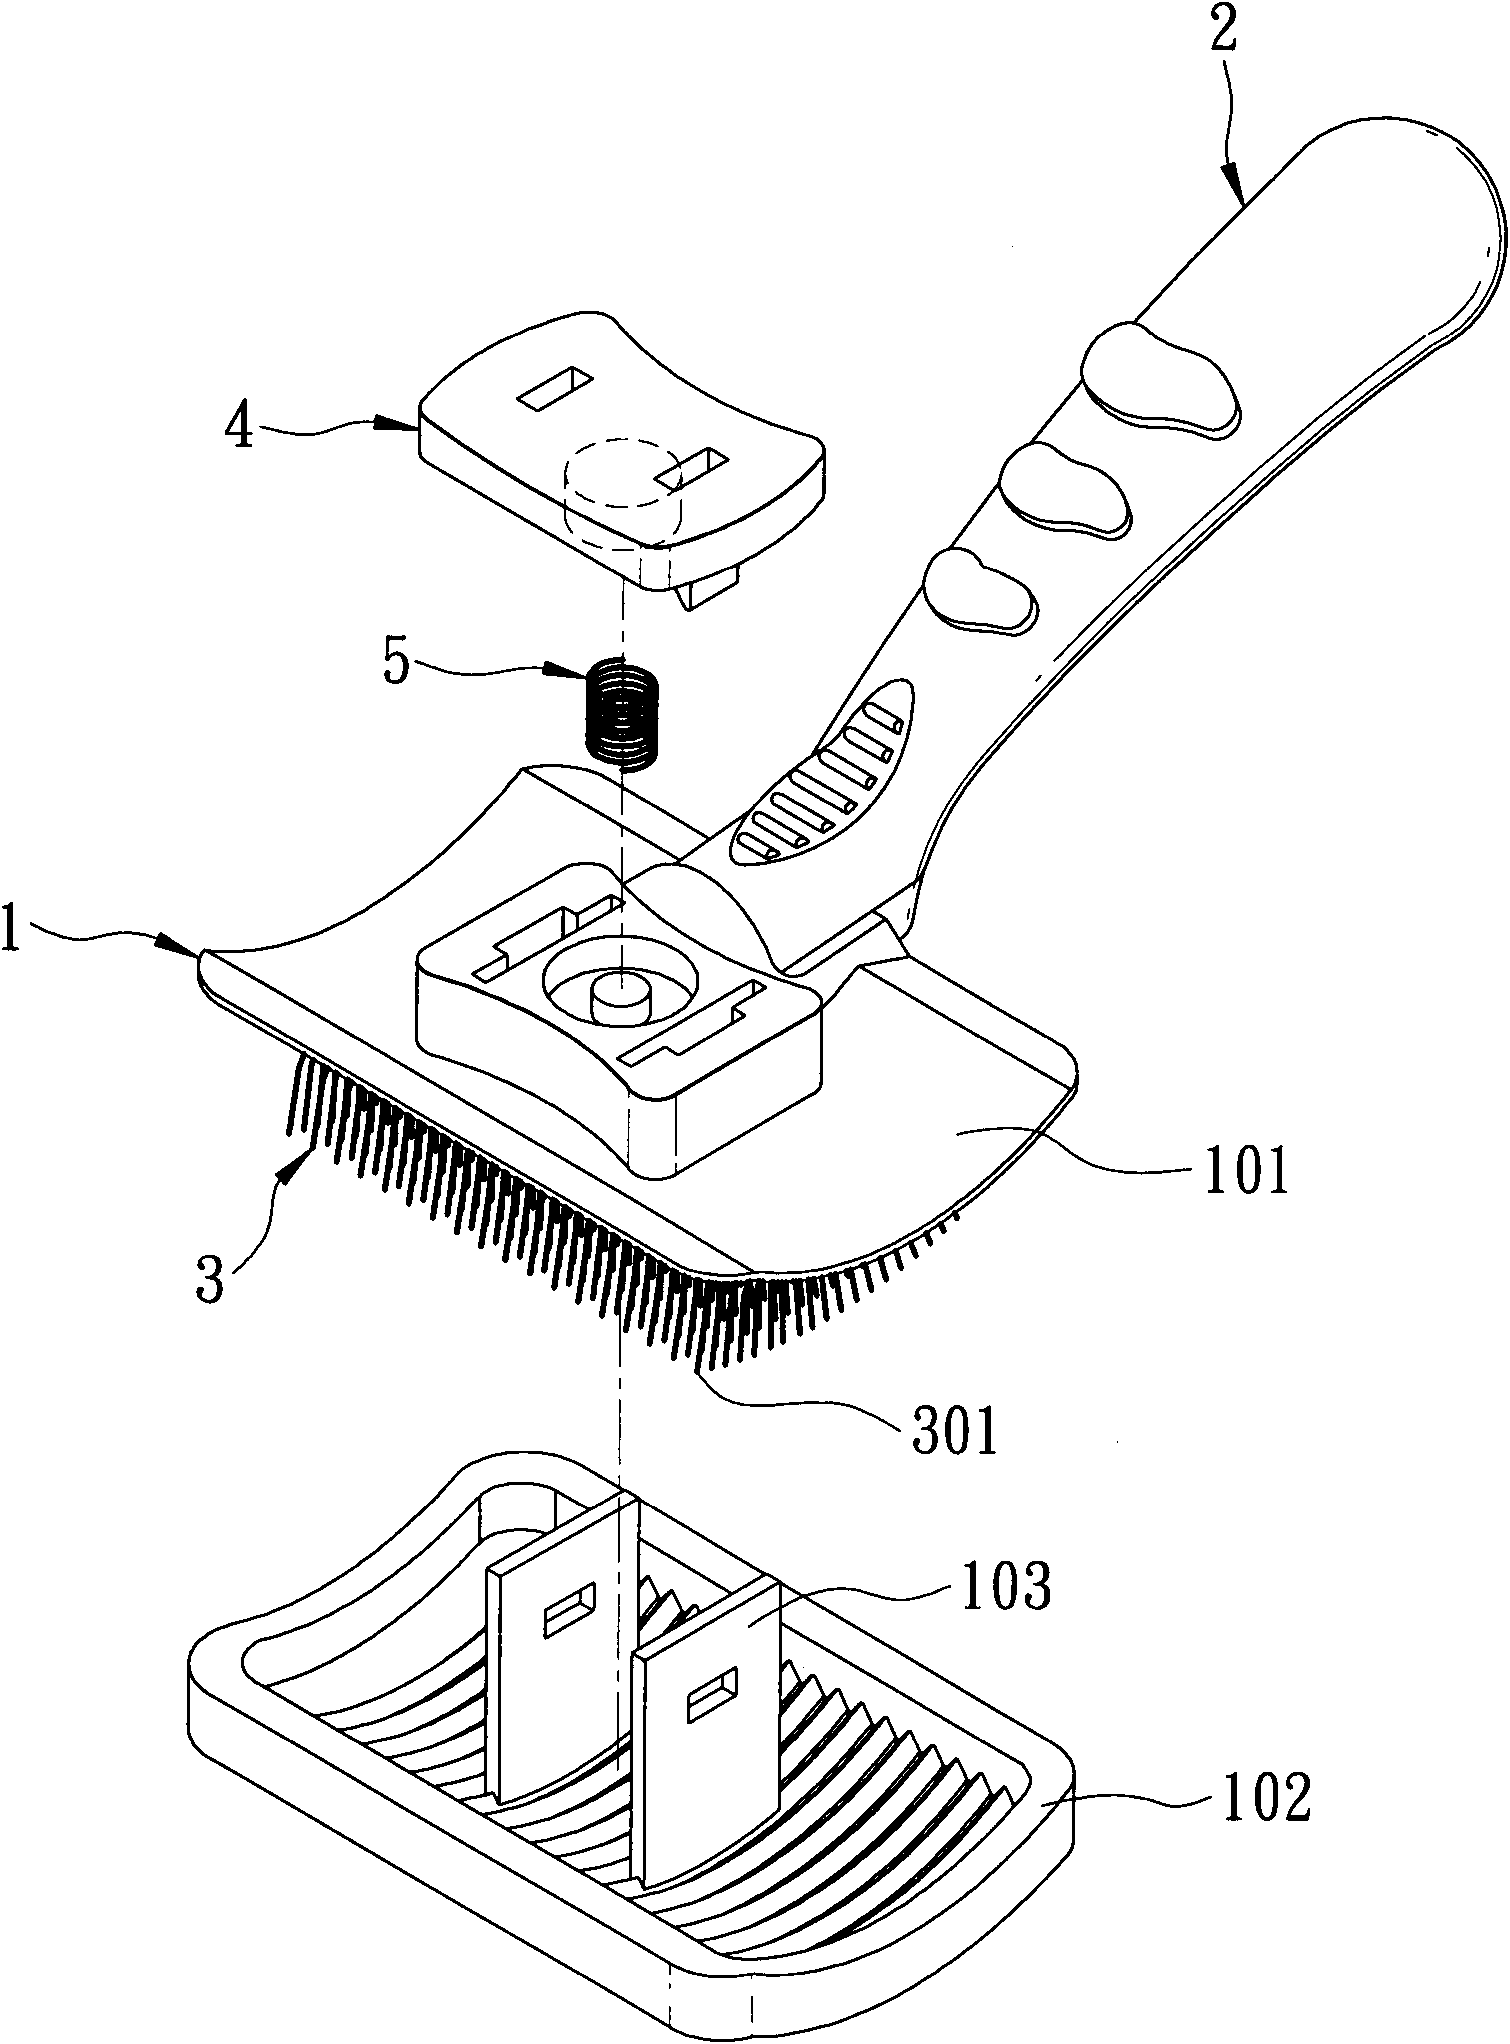 Hair comb capable of removing hooked hair